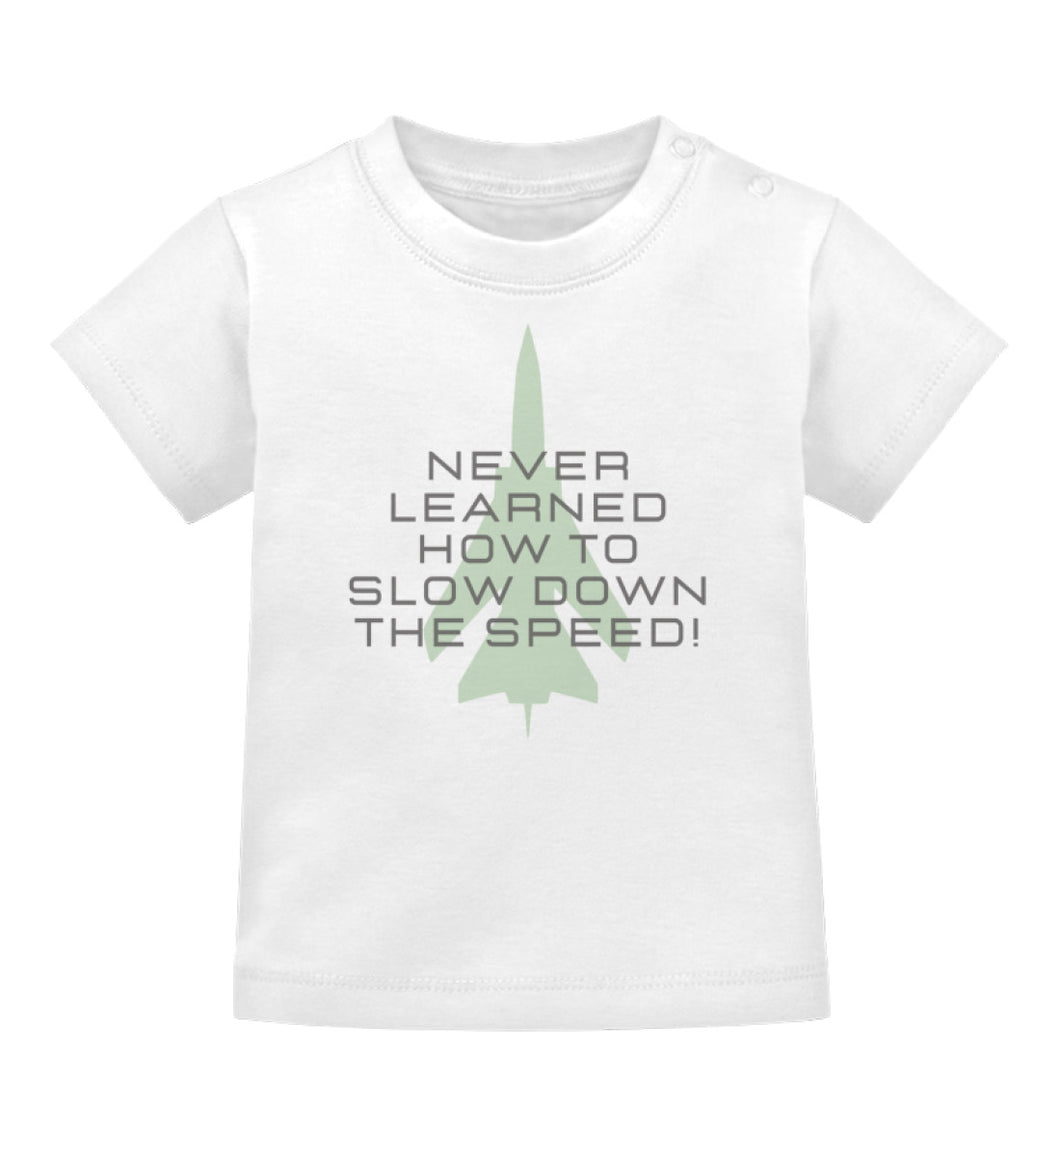 Never learned how to slow down the speed! - Baby T-Shirt